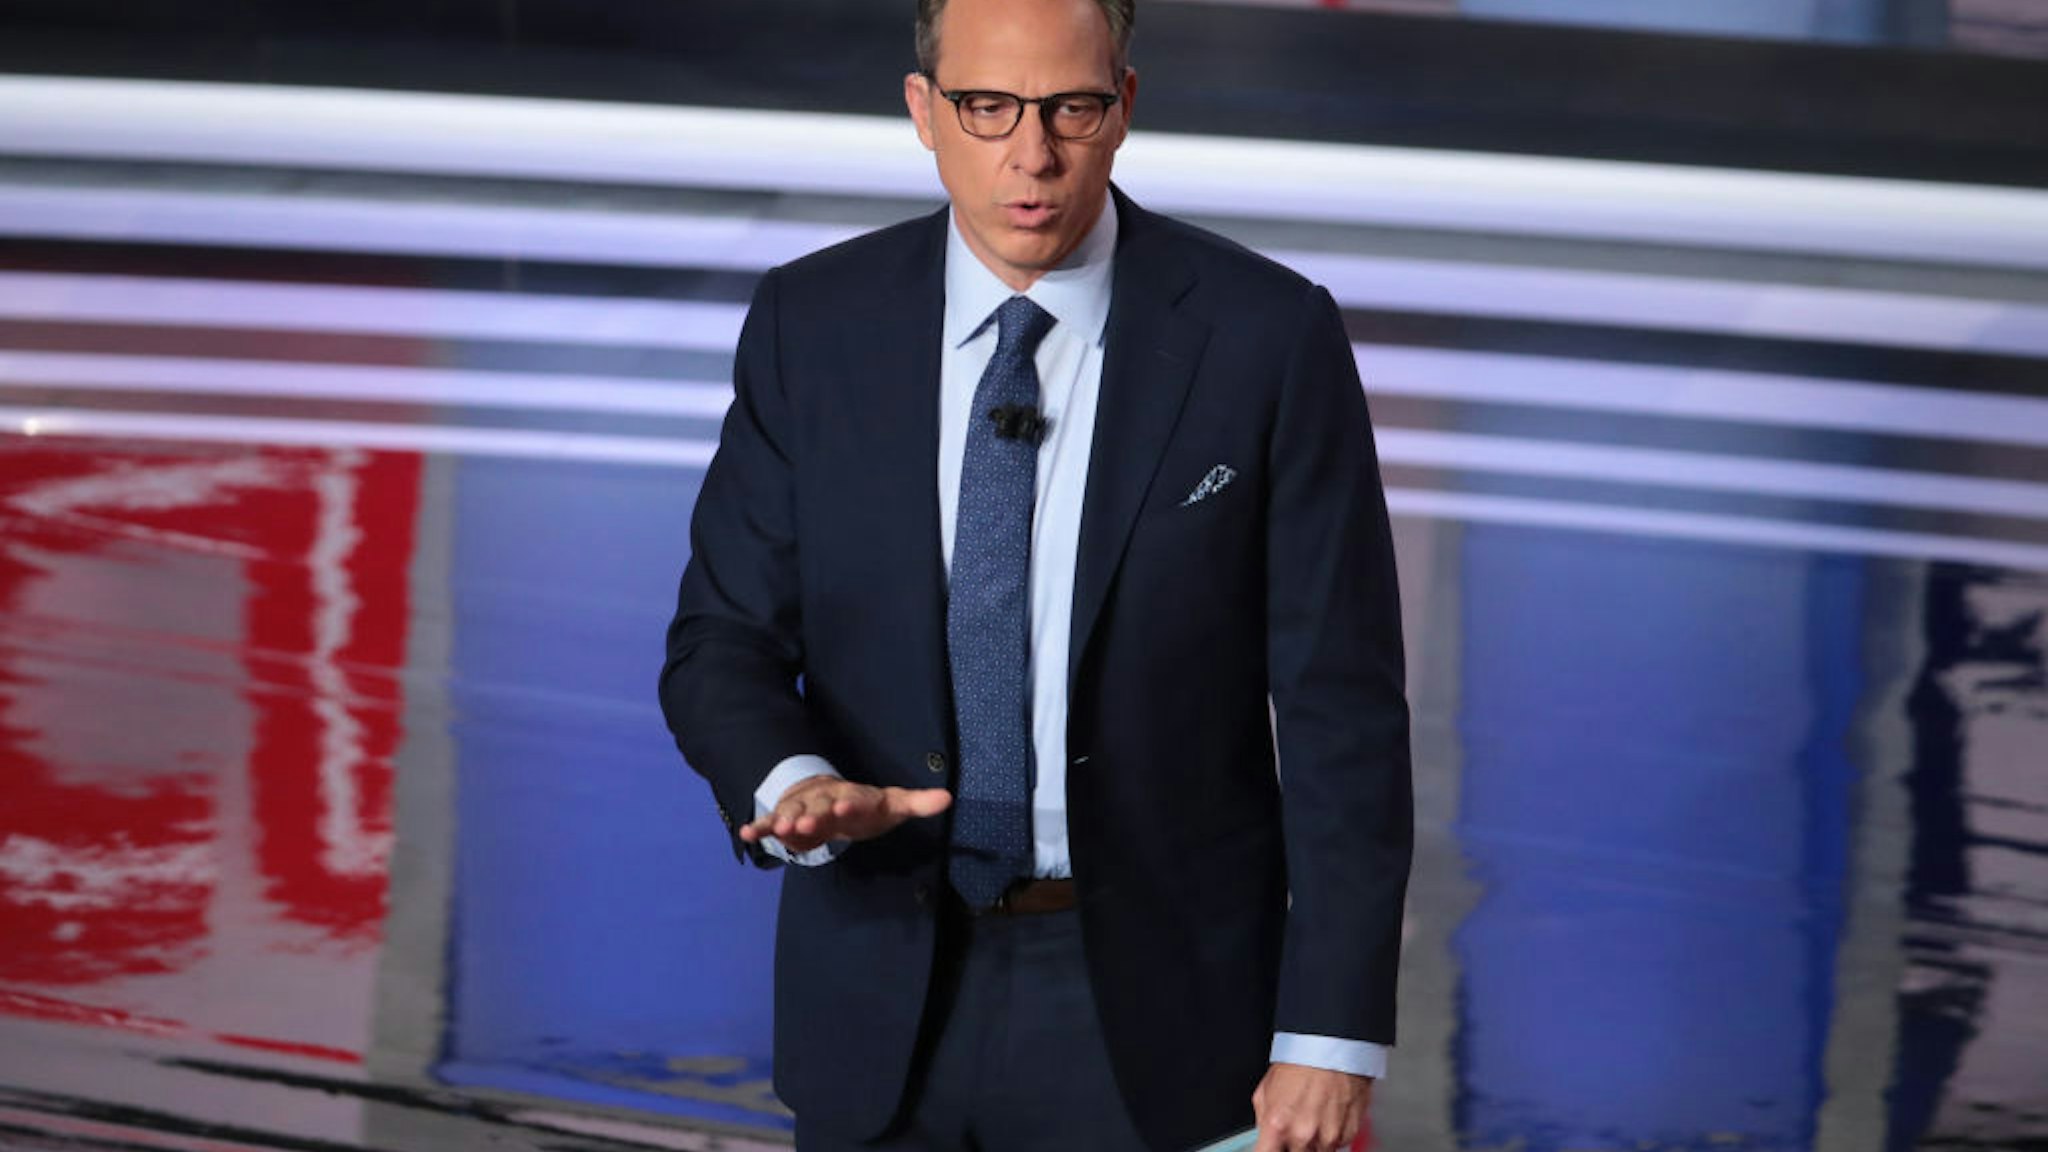 DETROIT, MICHIGAN - JULY 31: CNN moderator Jake Tapper speaks to the crowd attending the Democratic Presidential Debate at the Fox Theatre July 31, 2019 in Detroit, Michigan. 20 Democratic presidential candidates were split into two groups of 10 to take part in the debate sponsored by CNN held over two nights at Detroit’s Fox Theatre. (Photo by Scott Olson/Getty Images)